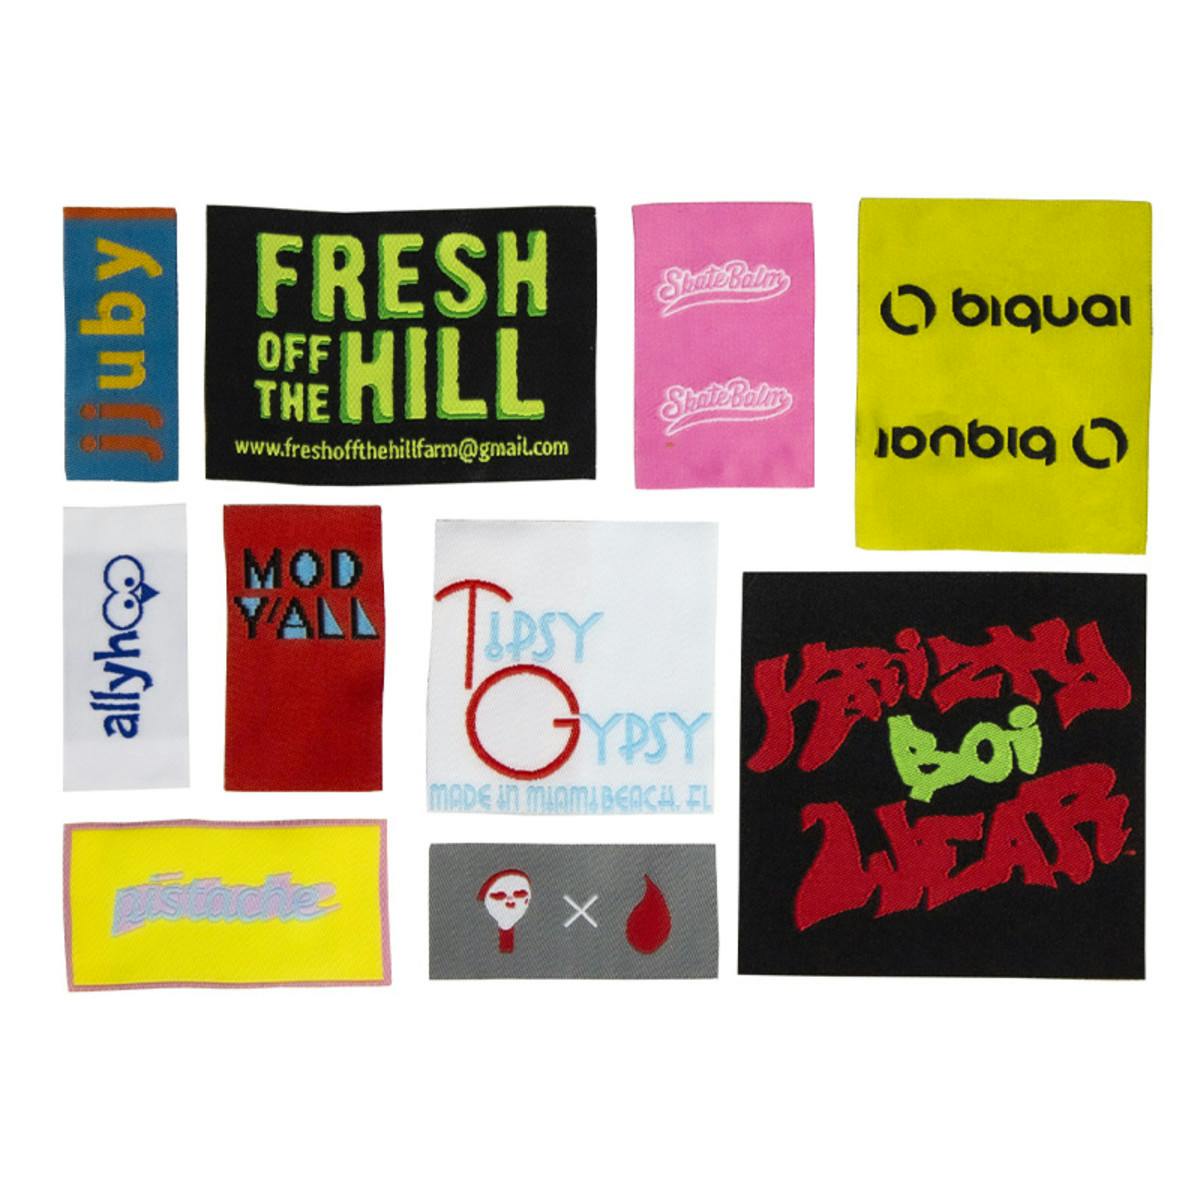  Custom clothing label examples